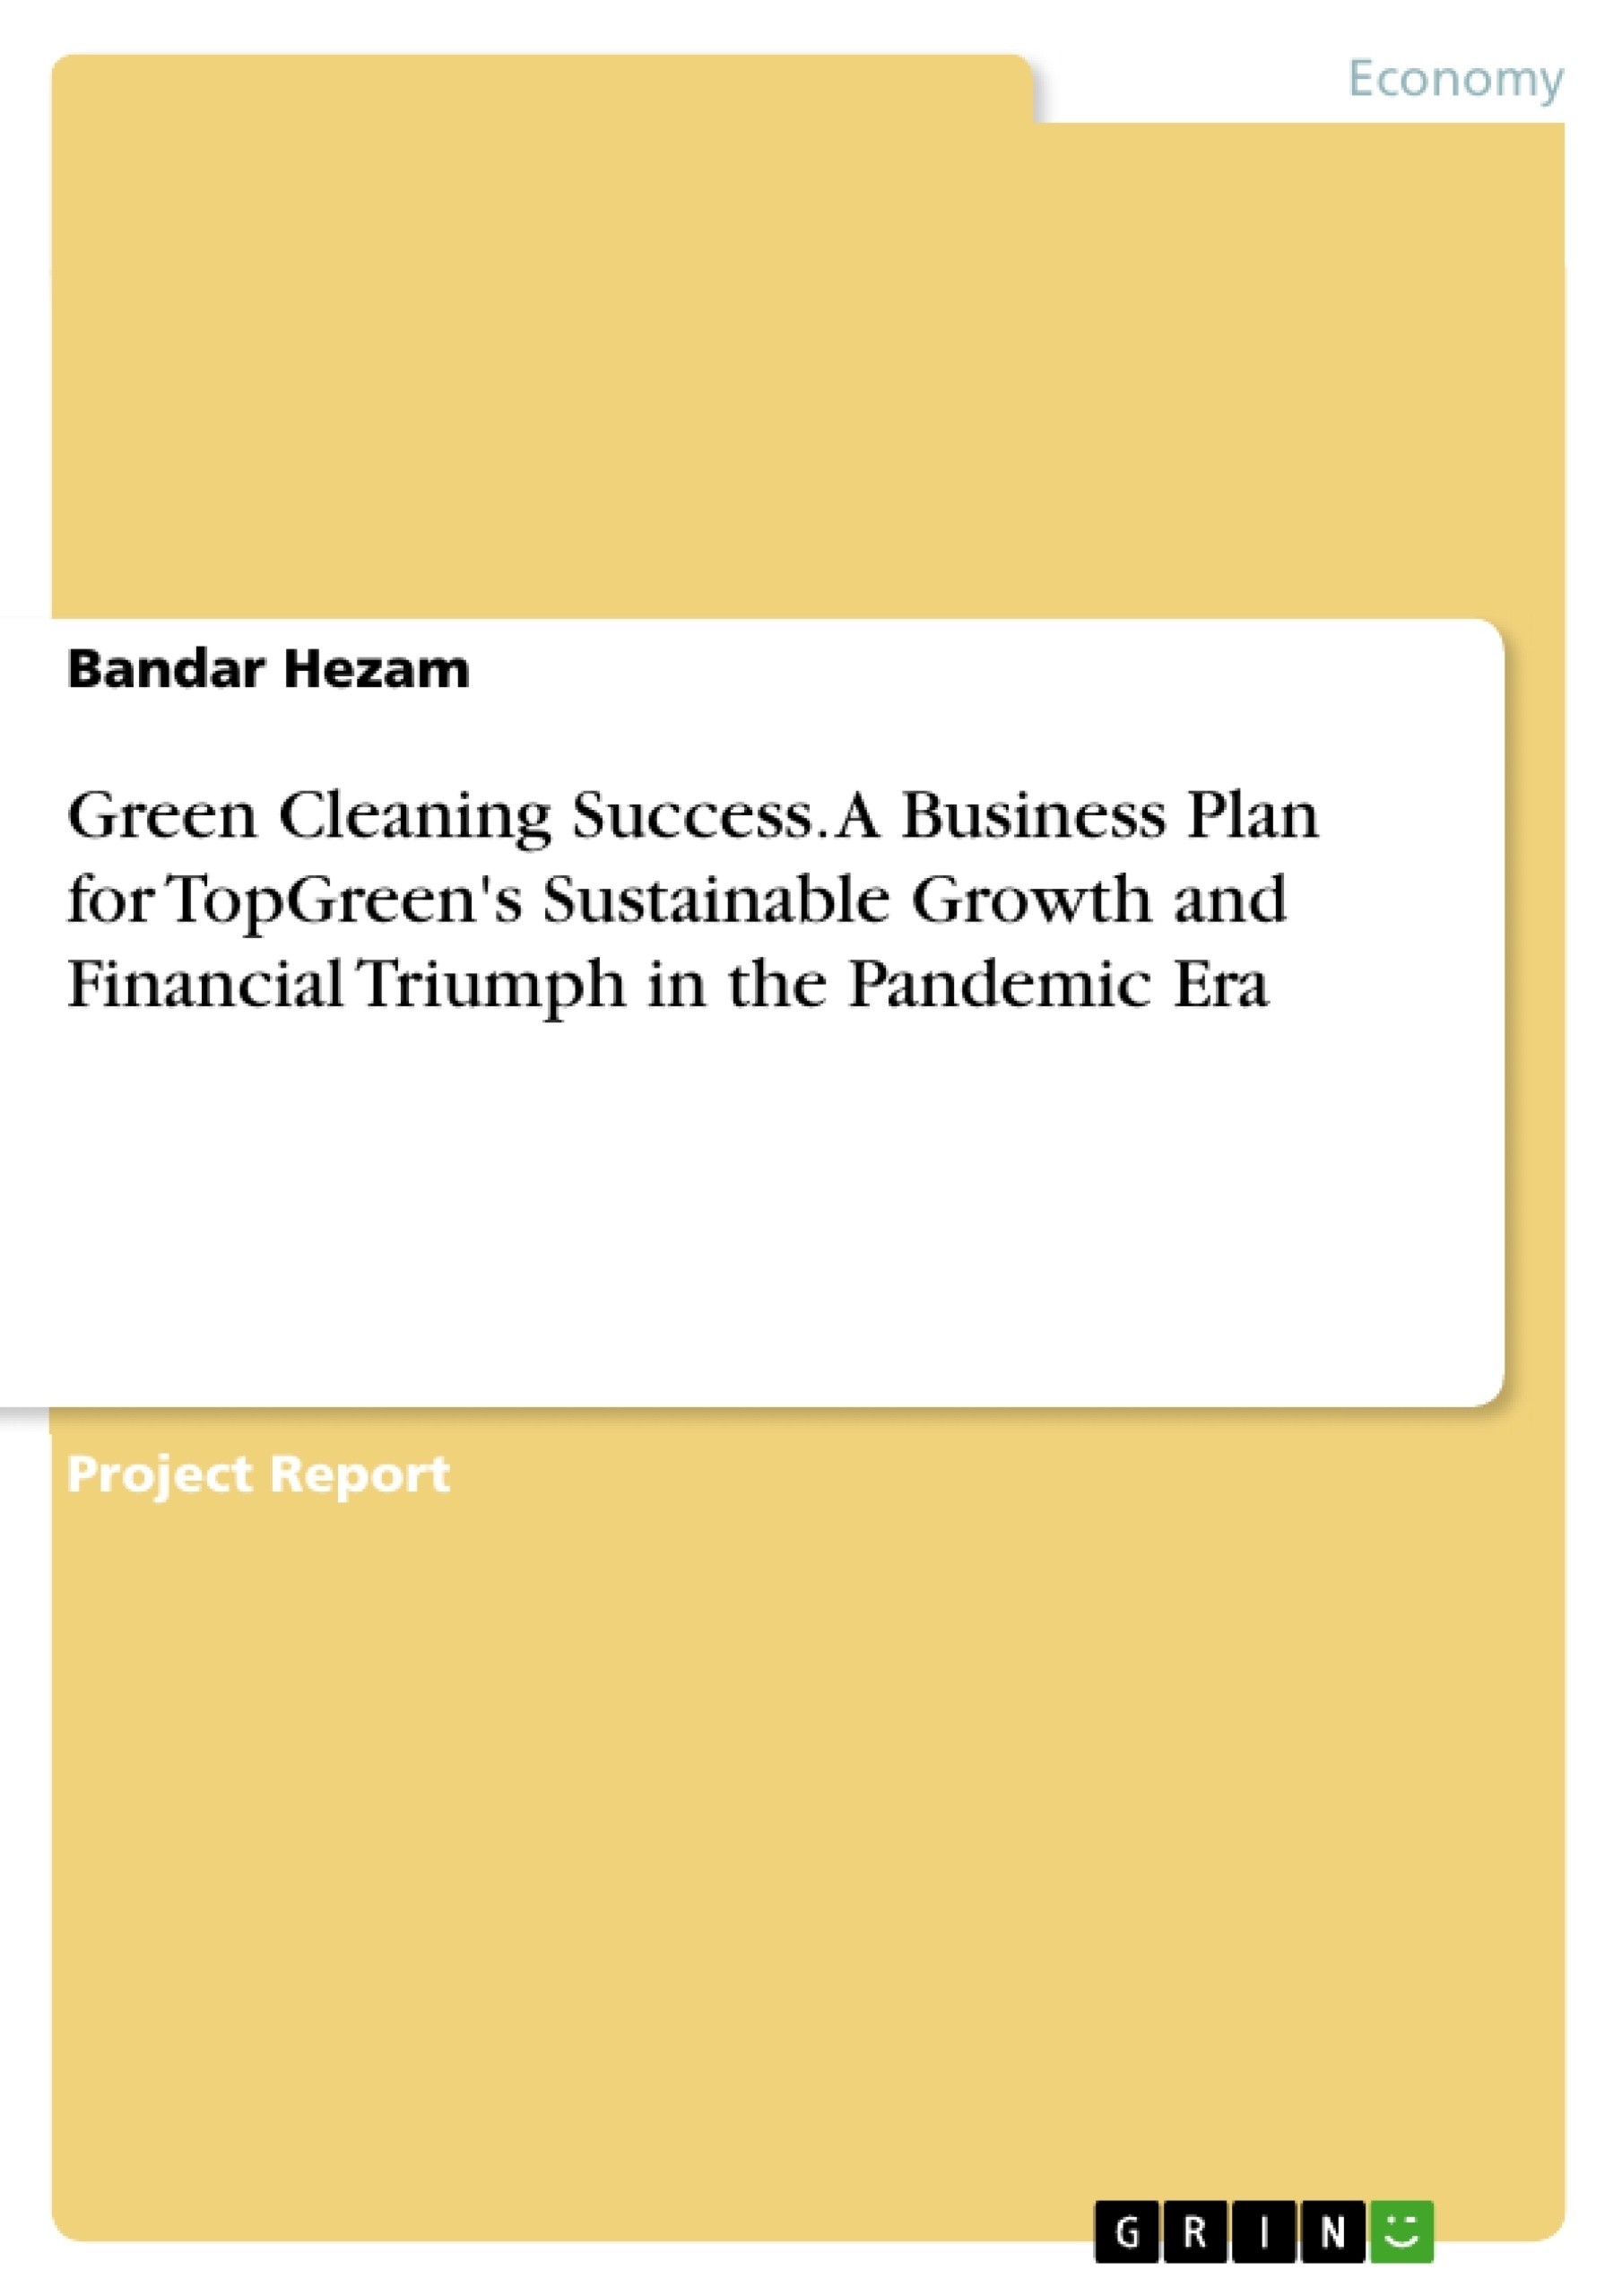 Title: Green Cleaning Success. A Business Plan for TopGreen's Sustainable Growth and Financial Triumph in the Pandemic Era